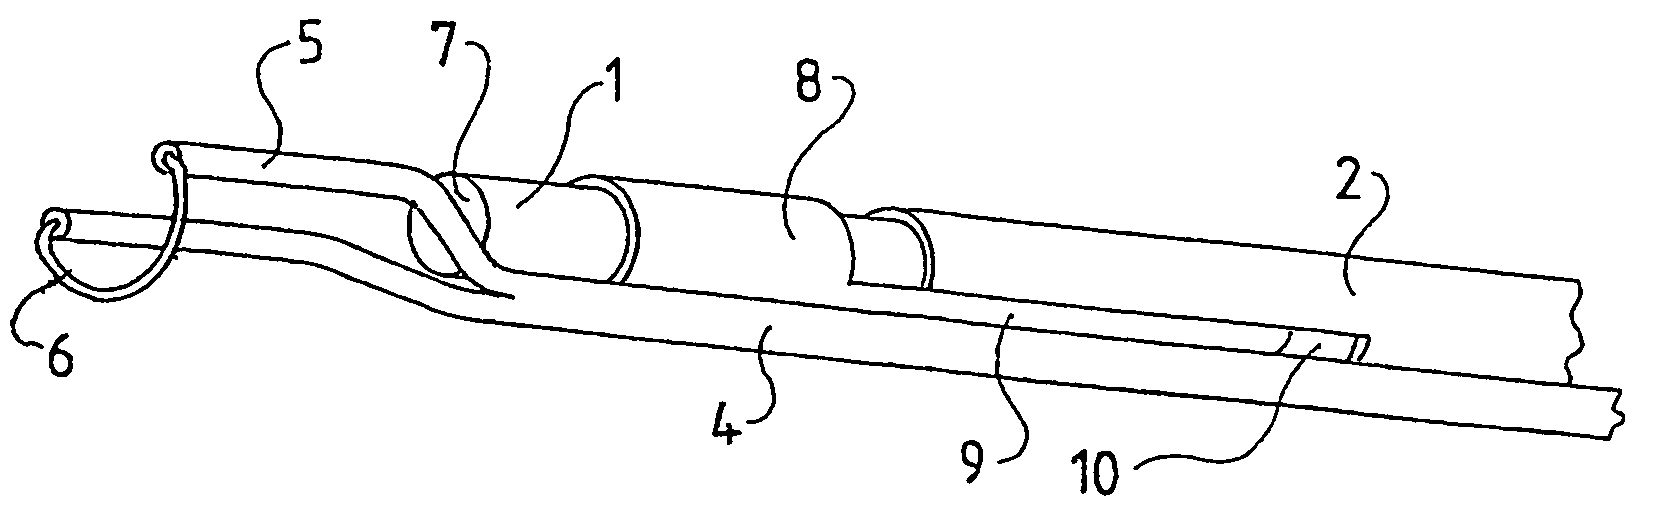 Urological resectoscope having a non-rotating instrument support